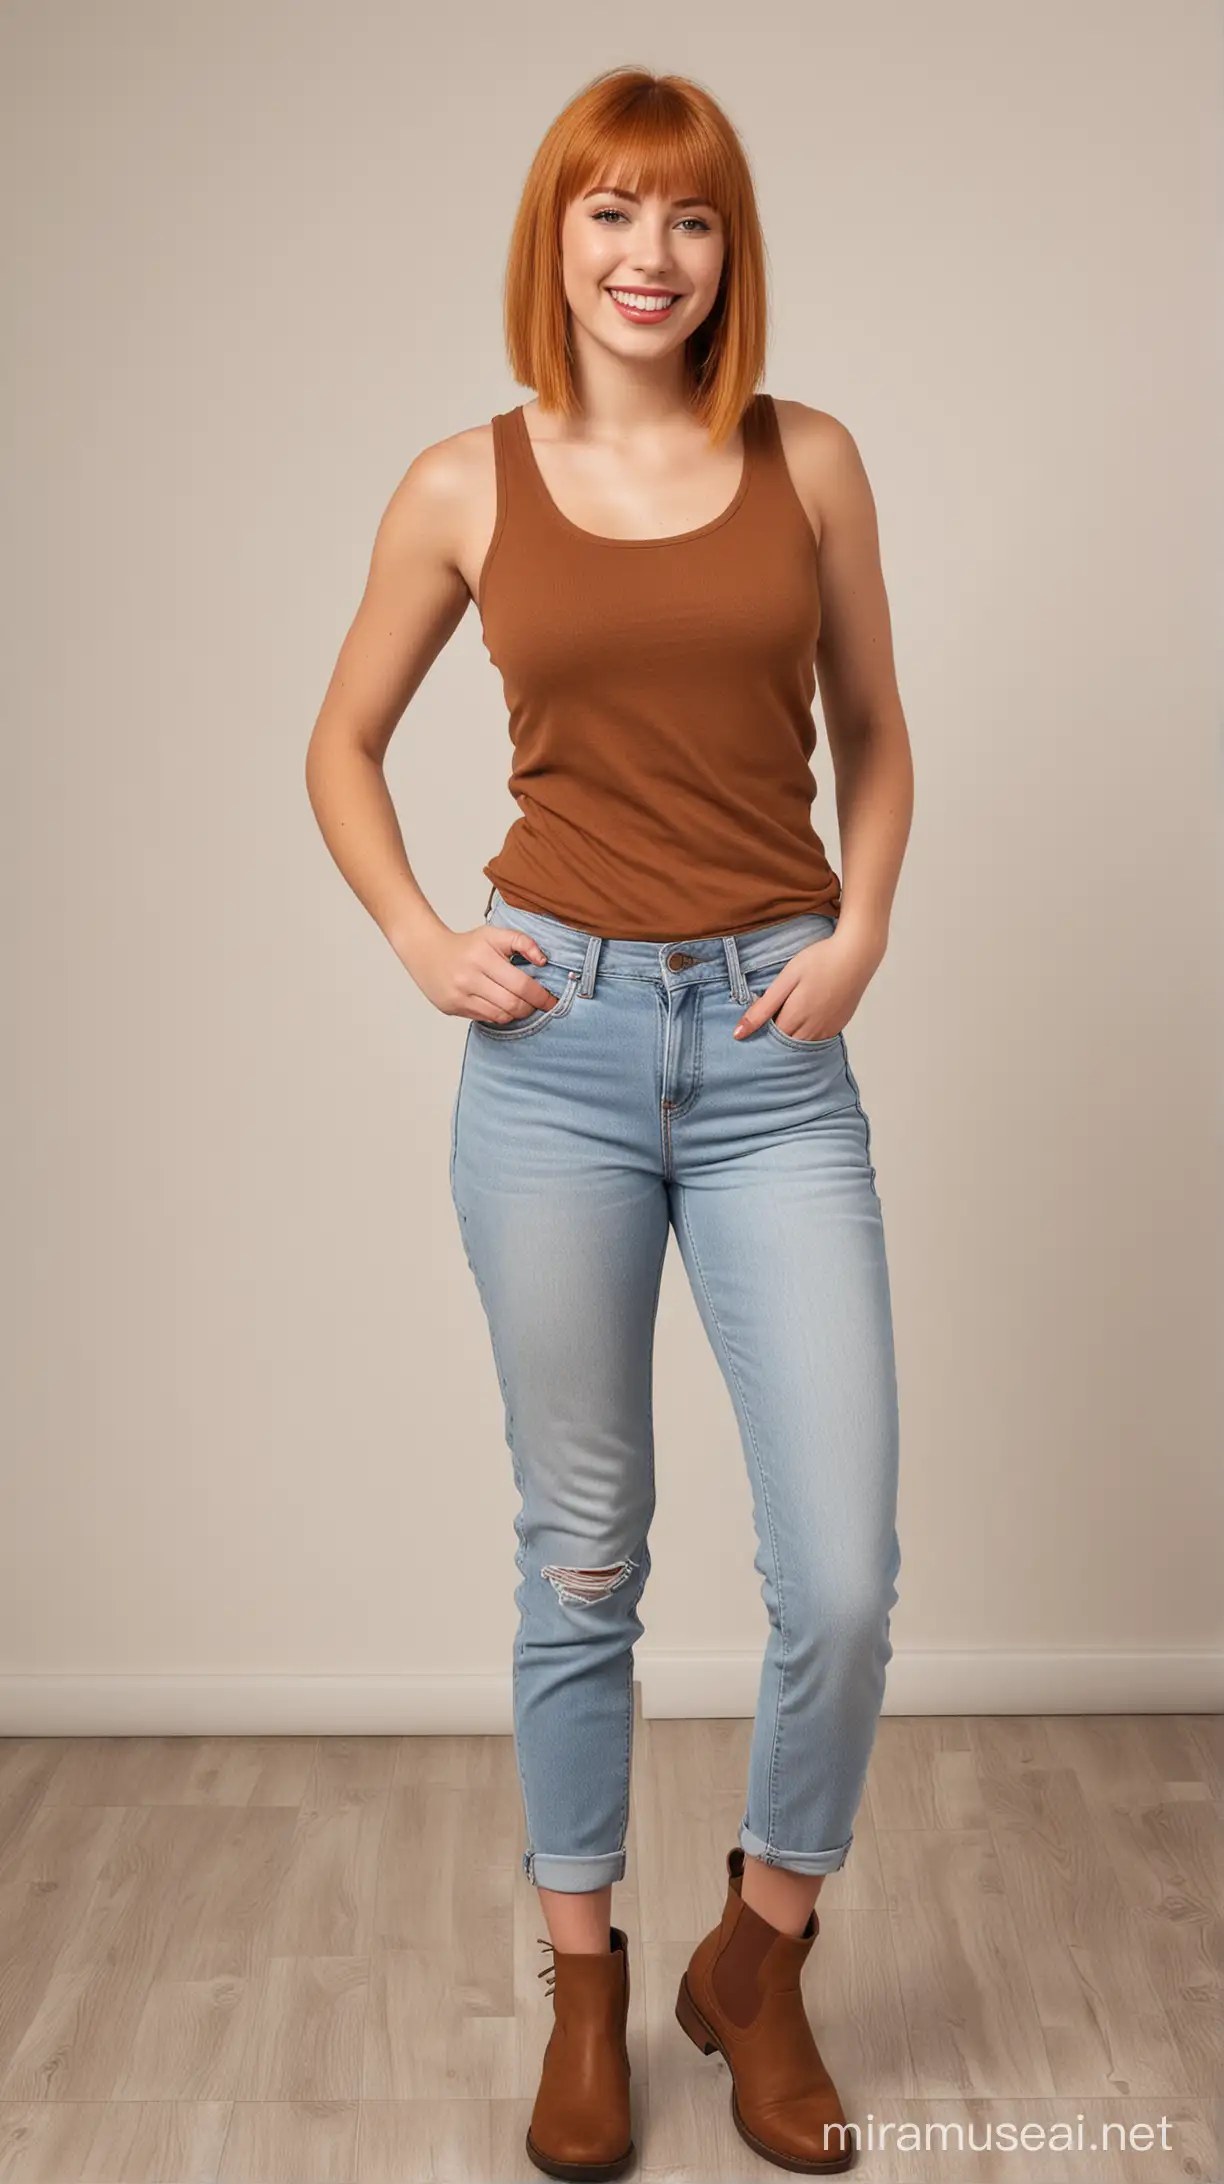 a photo of a white woman, 20 years old, straight orange hair with a fringe, hazel eyes, red lipstick, wearing a white tank top, wearing straight skinny black jeans, wearing brown chelsea boots, smiling, posing naturally, hands in her trouser pockets, indoors, natural light, empty background, full body shot shot, wide angle, front view, HDR, professional details